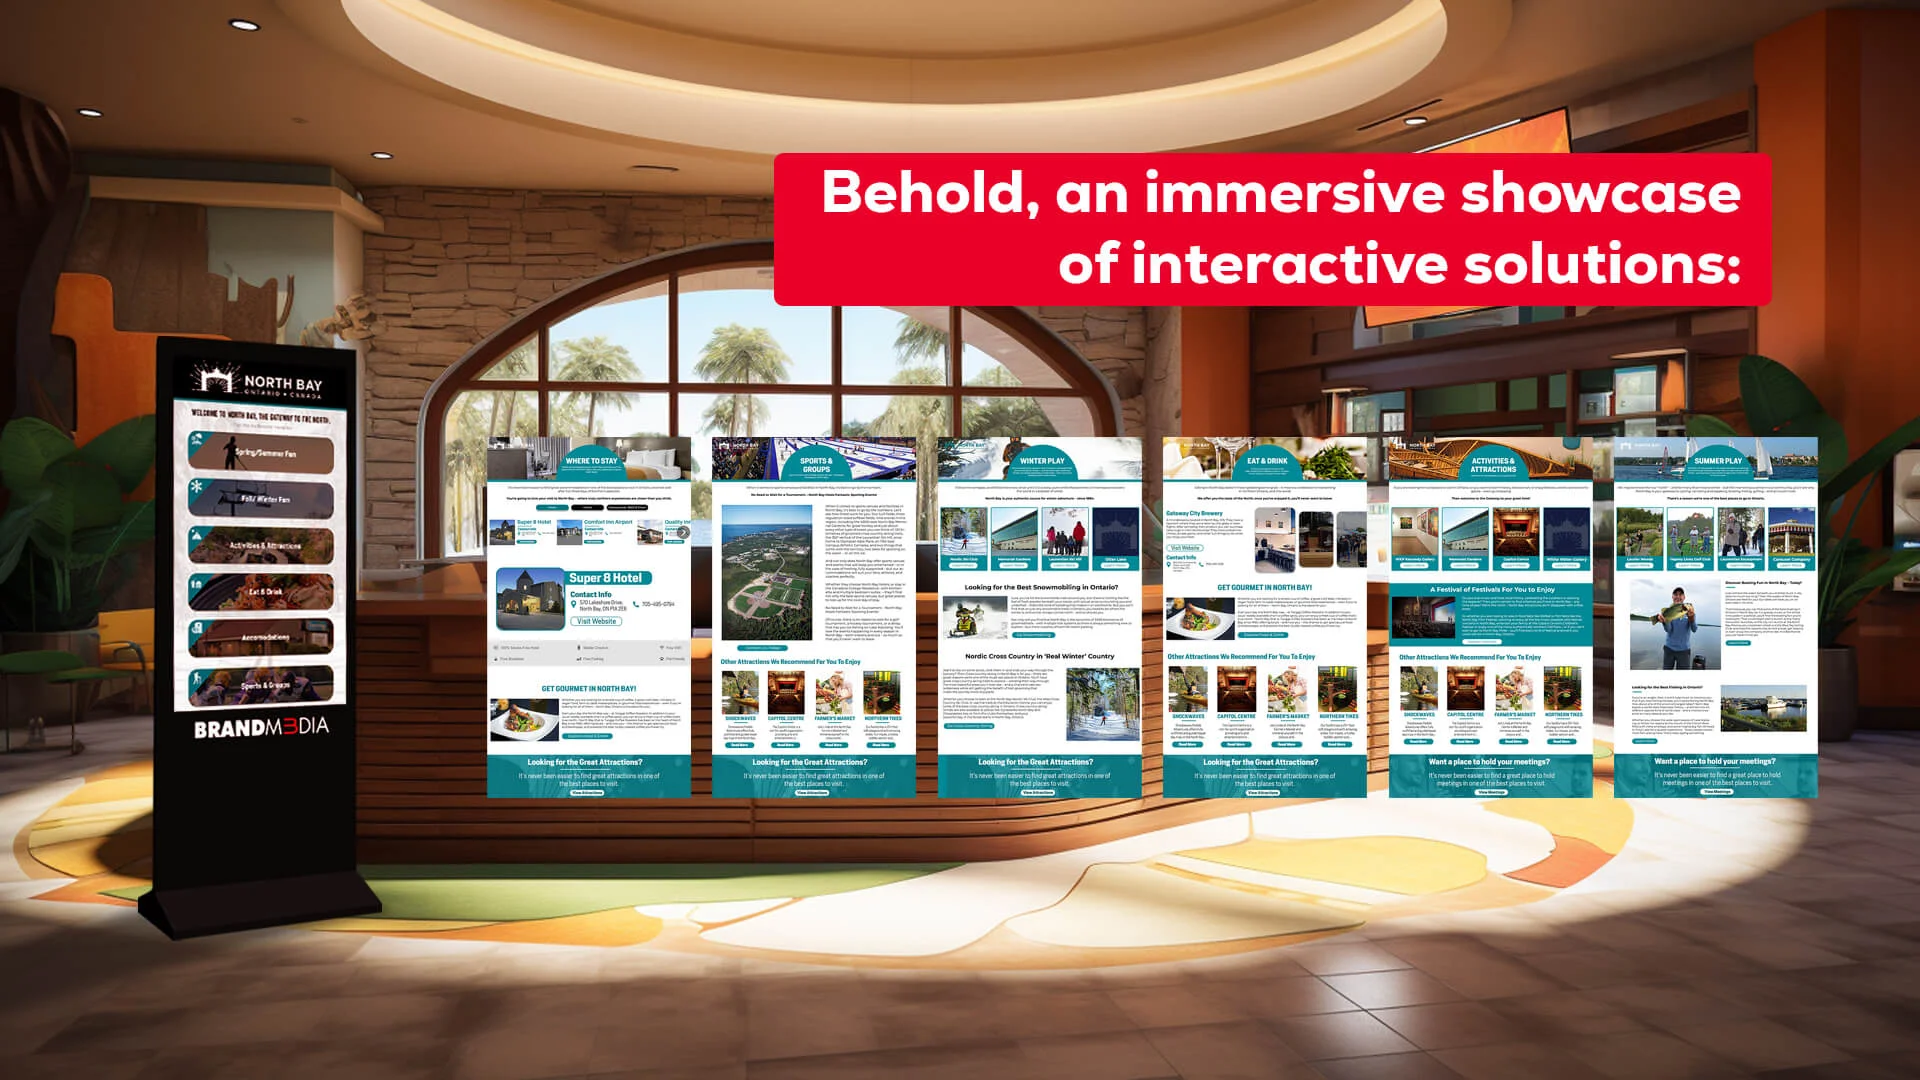 Brandm3dia- behold an immersive showcase of interactive solutions